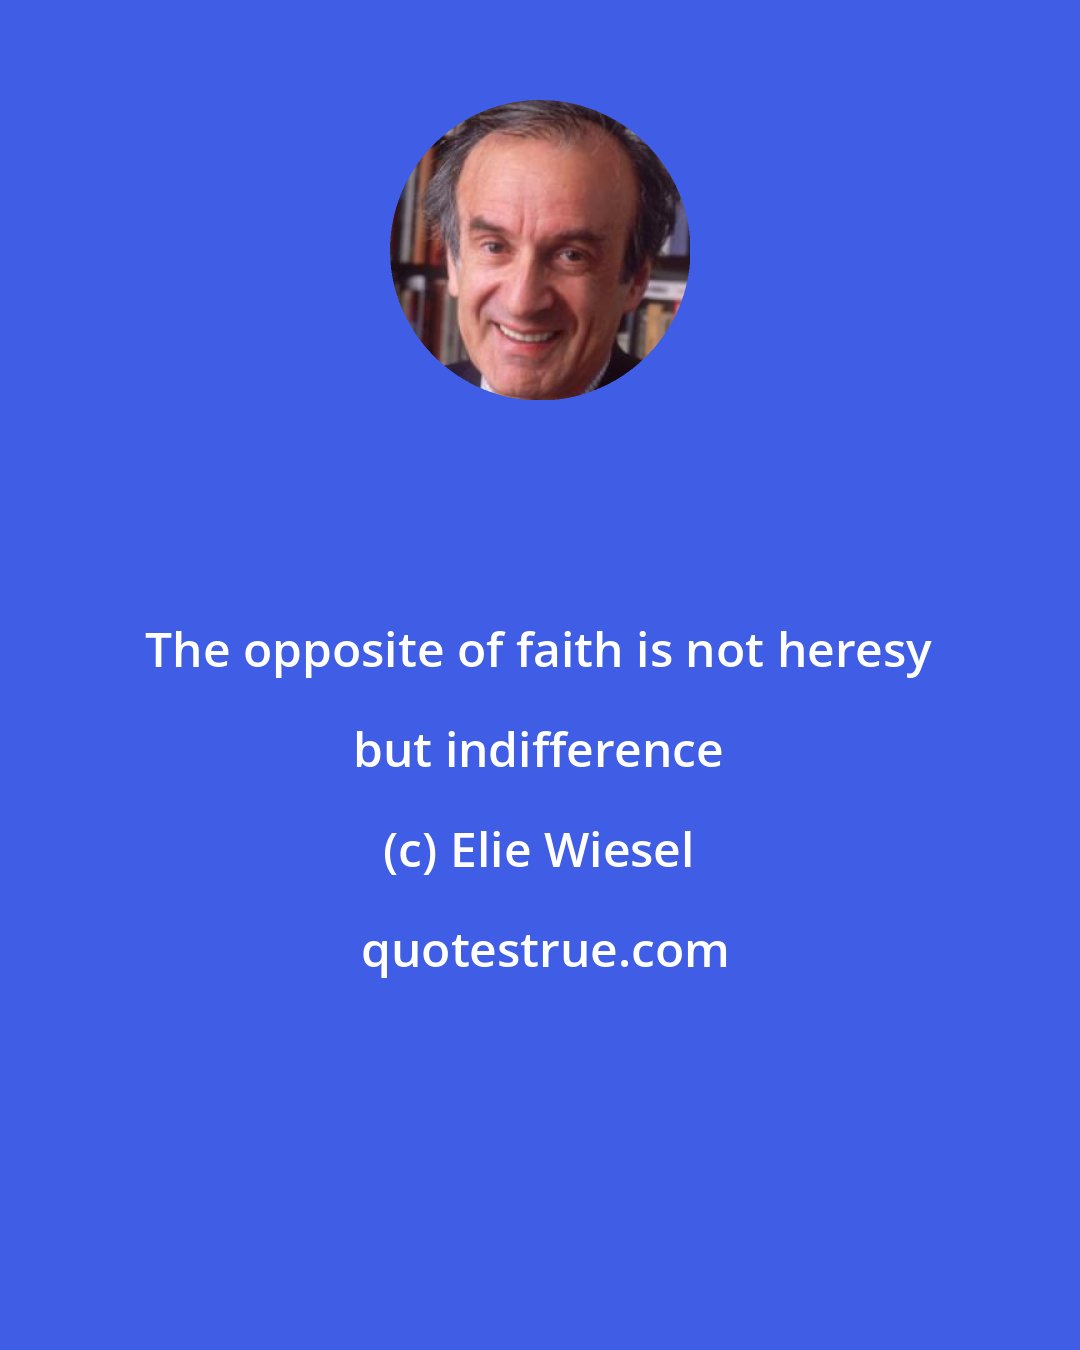 Elie Wiesel: The opposite of faith is not heresy but indifference